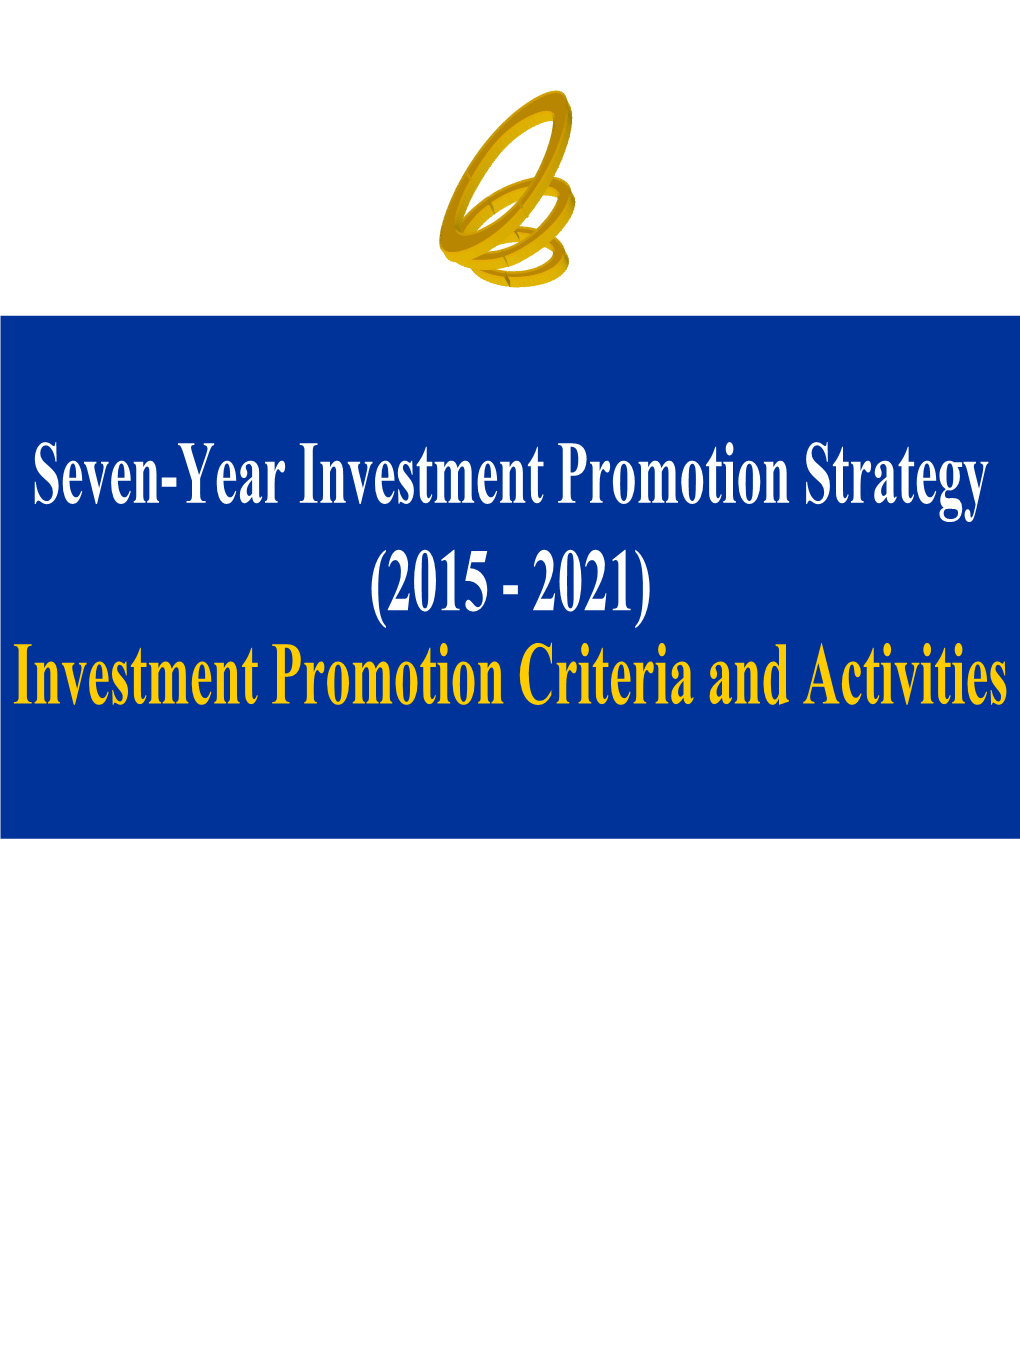 Seven-Year Investment Promotion Strategy (2015 - 2021) Investment Promotion Criteria and Activities 7-Year Investment Promotion Vision